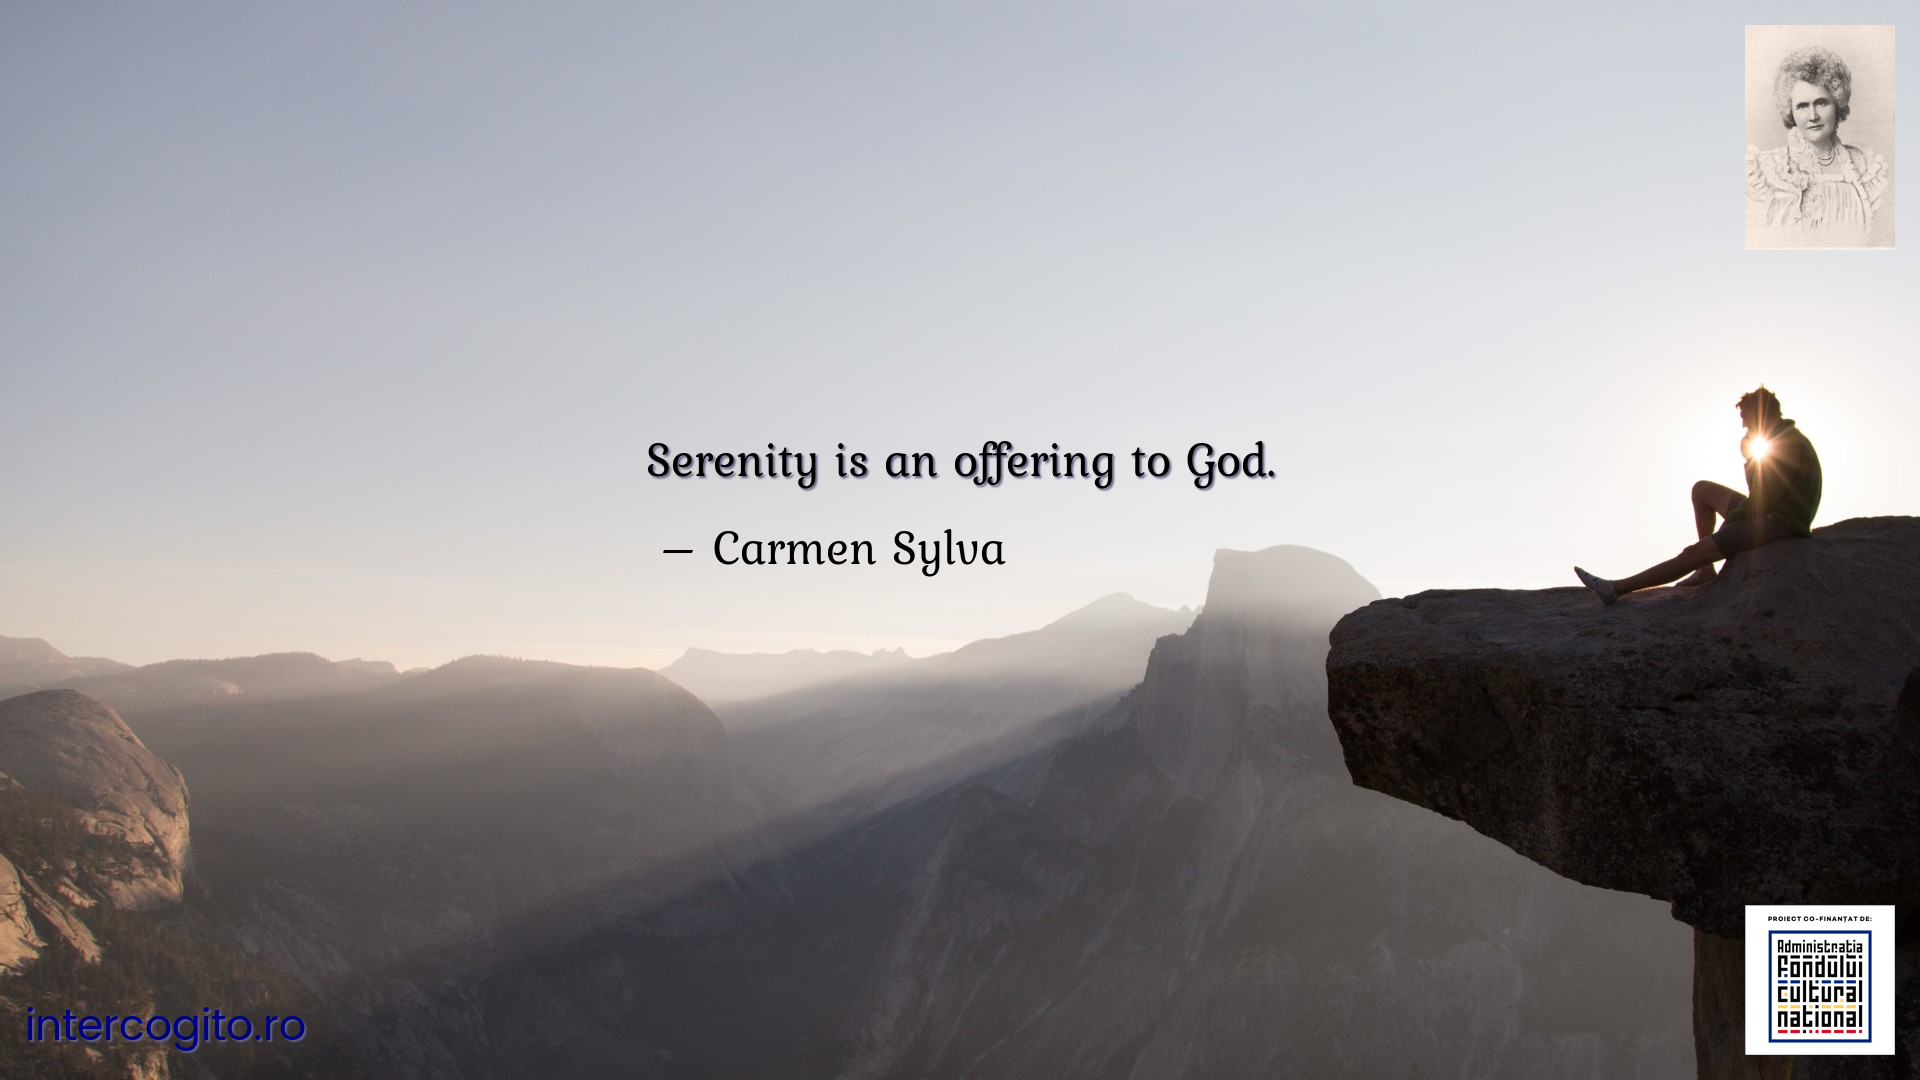 Serenity is an offering to God.